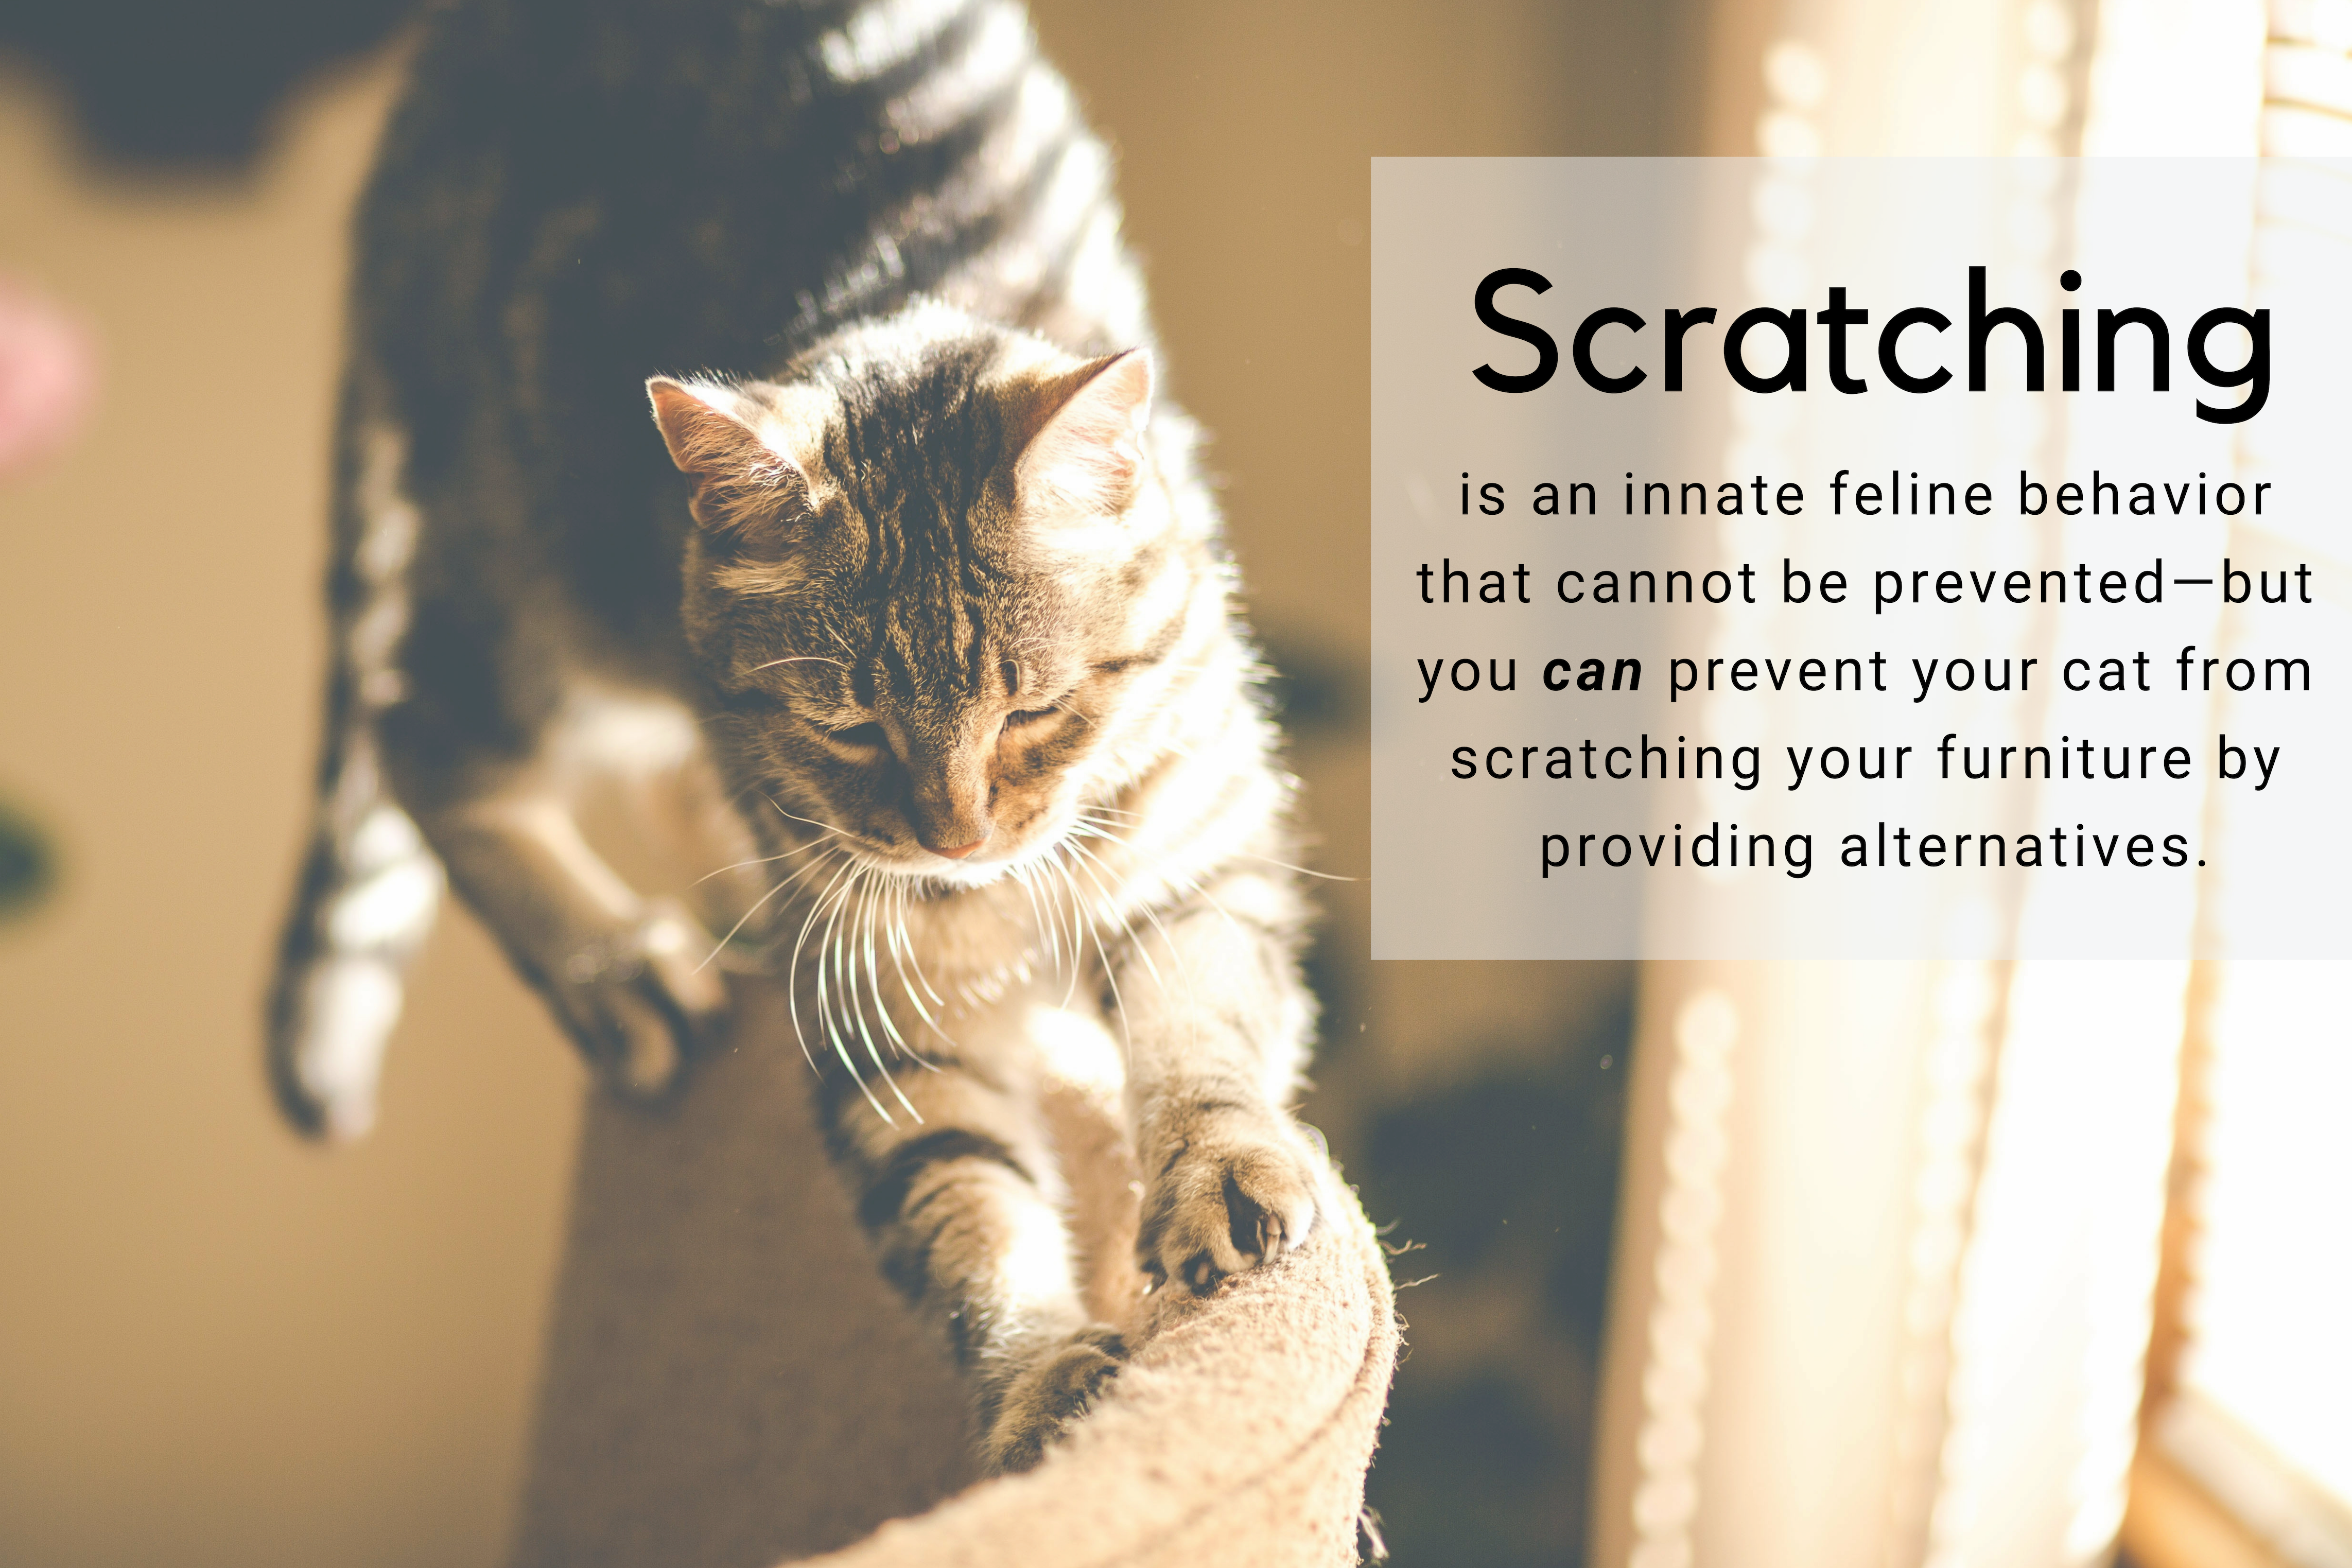 Scratching is an innate feline behavior that cannot be prevented—but you can prevent your cat from scratching your furniture by providing alternatives.